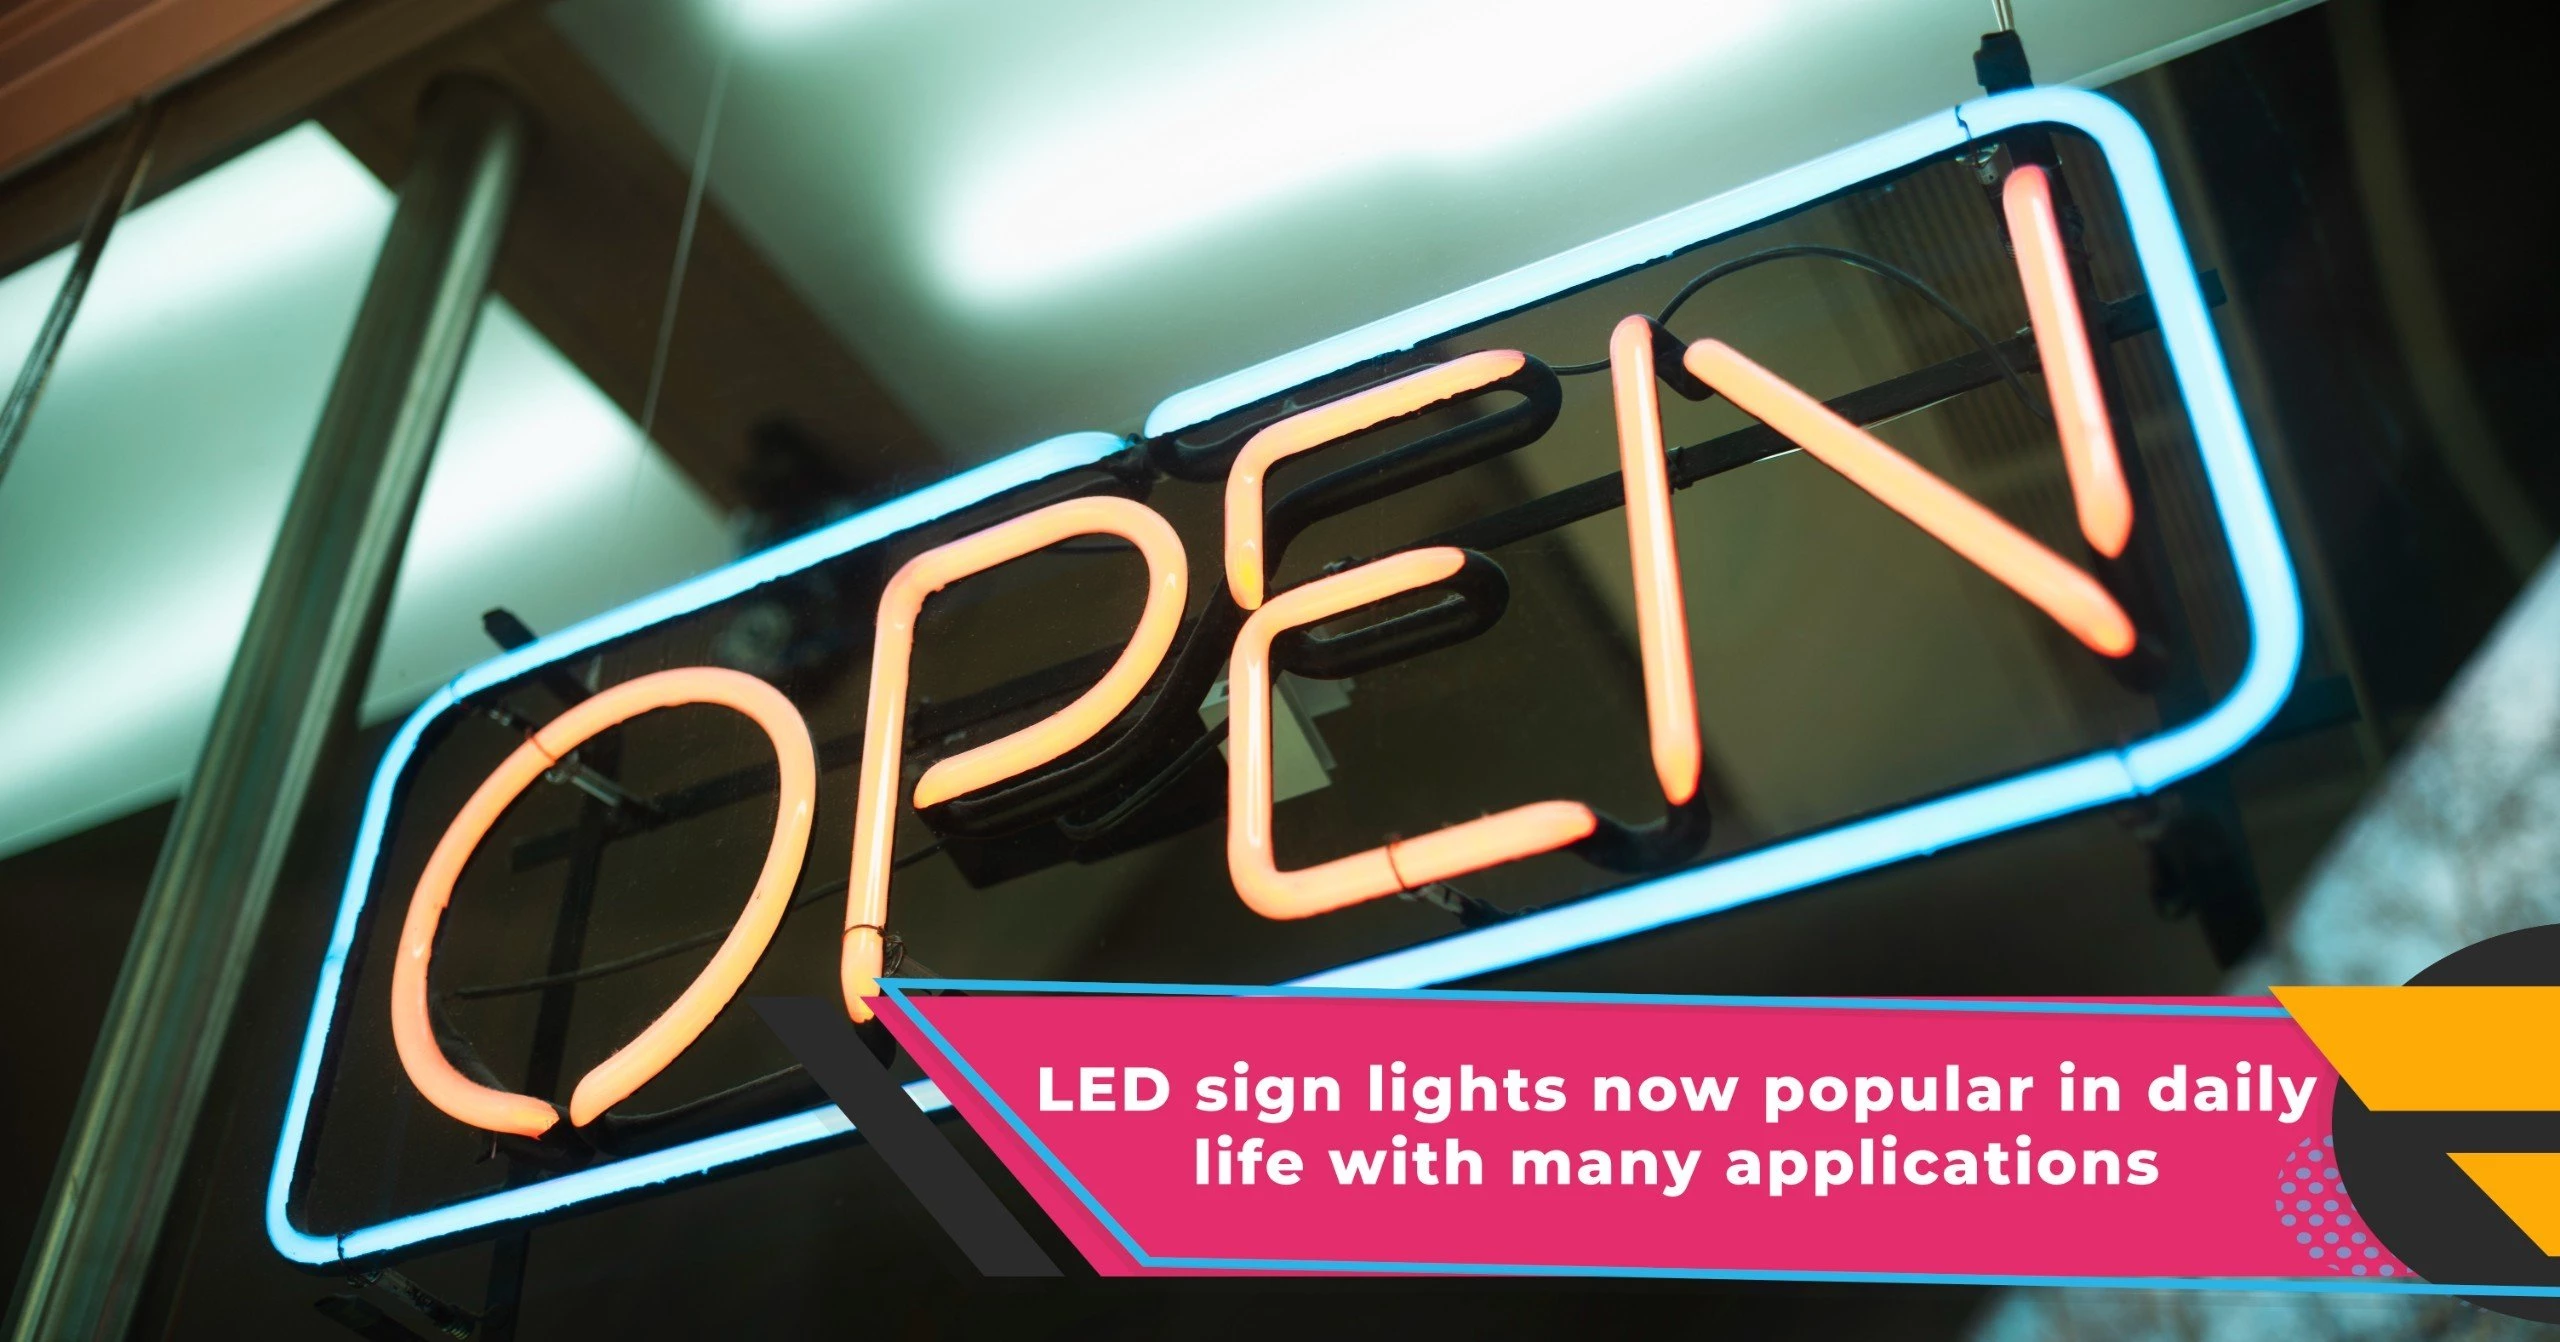 LED sign lights now popular in daily life with many applications